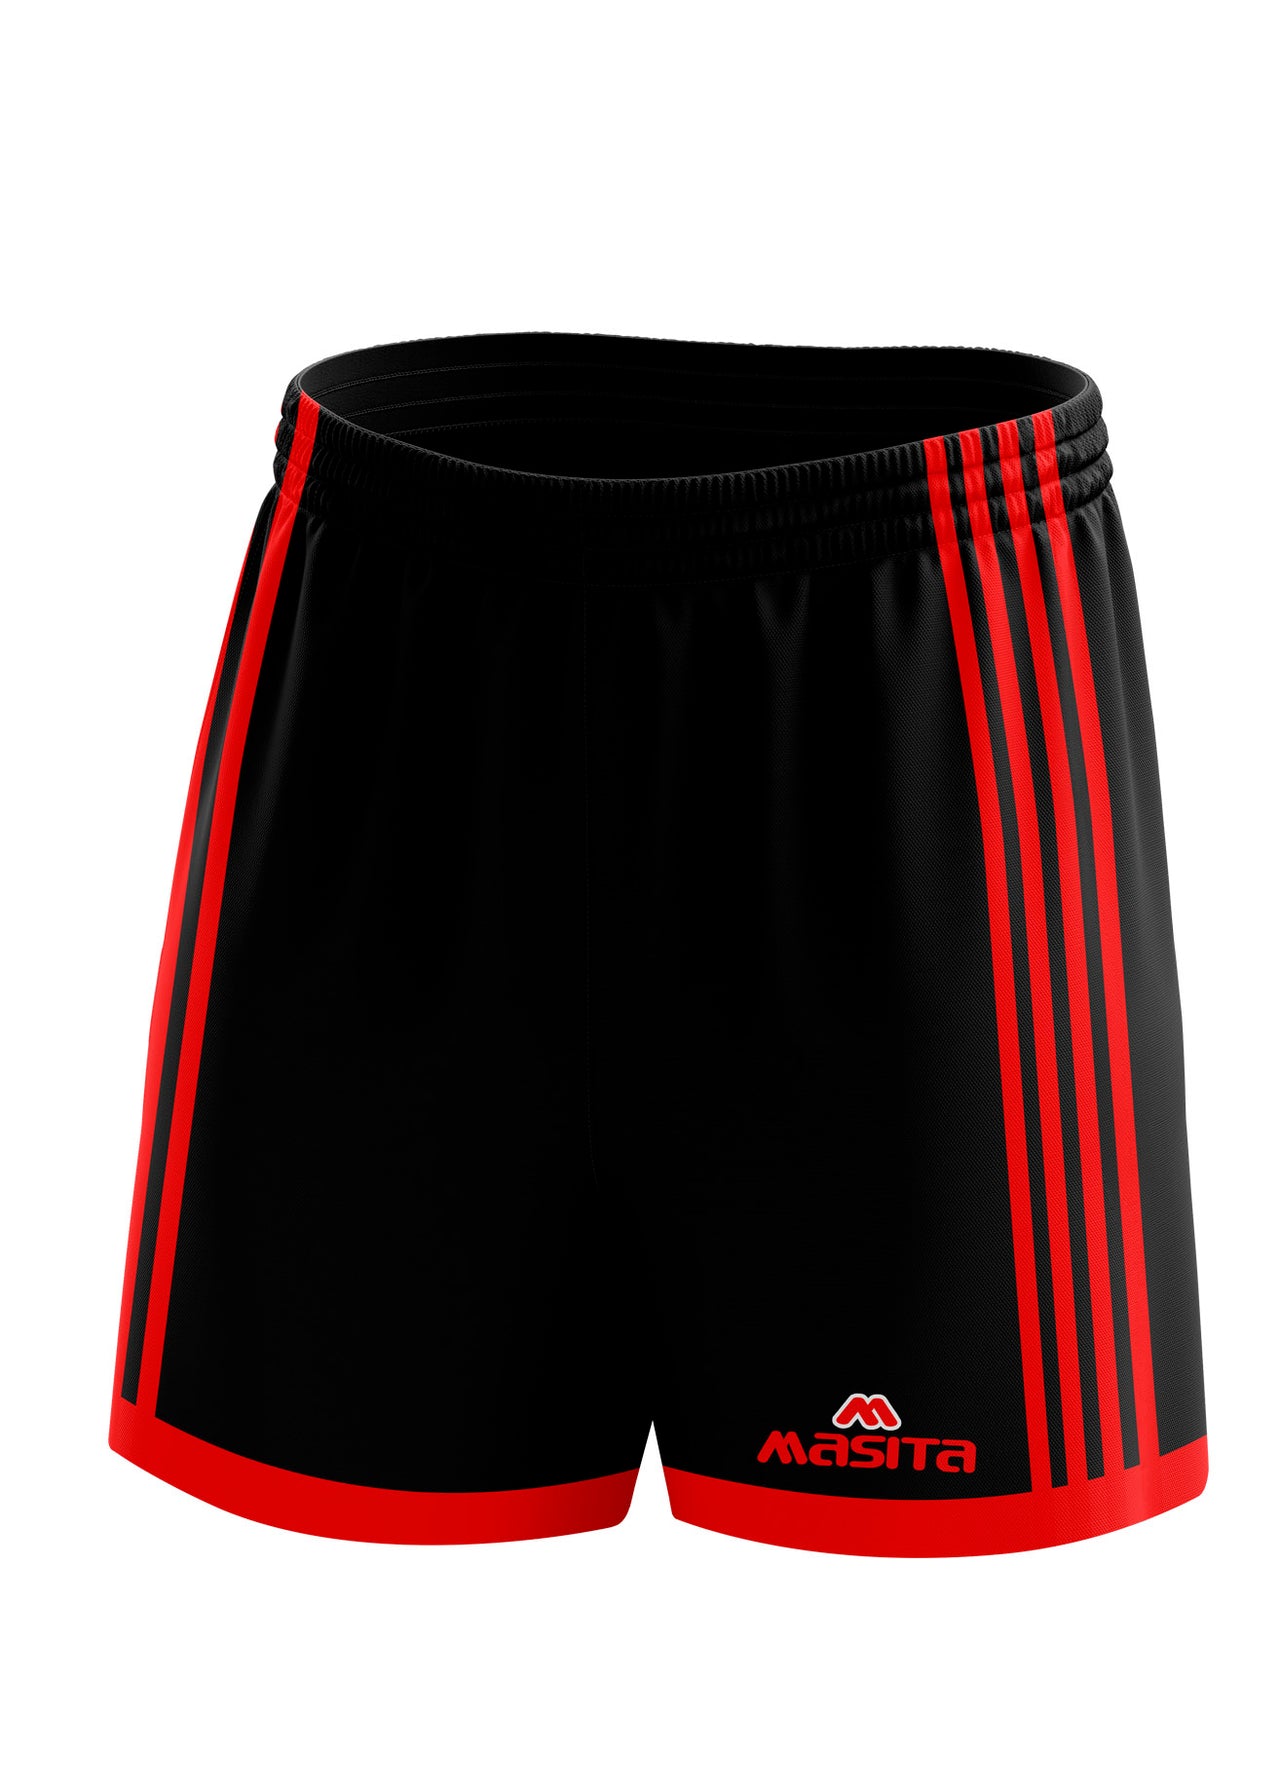 Solo Gaelic Shorts Black/Red Adult